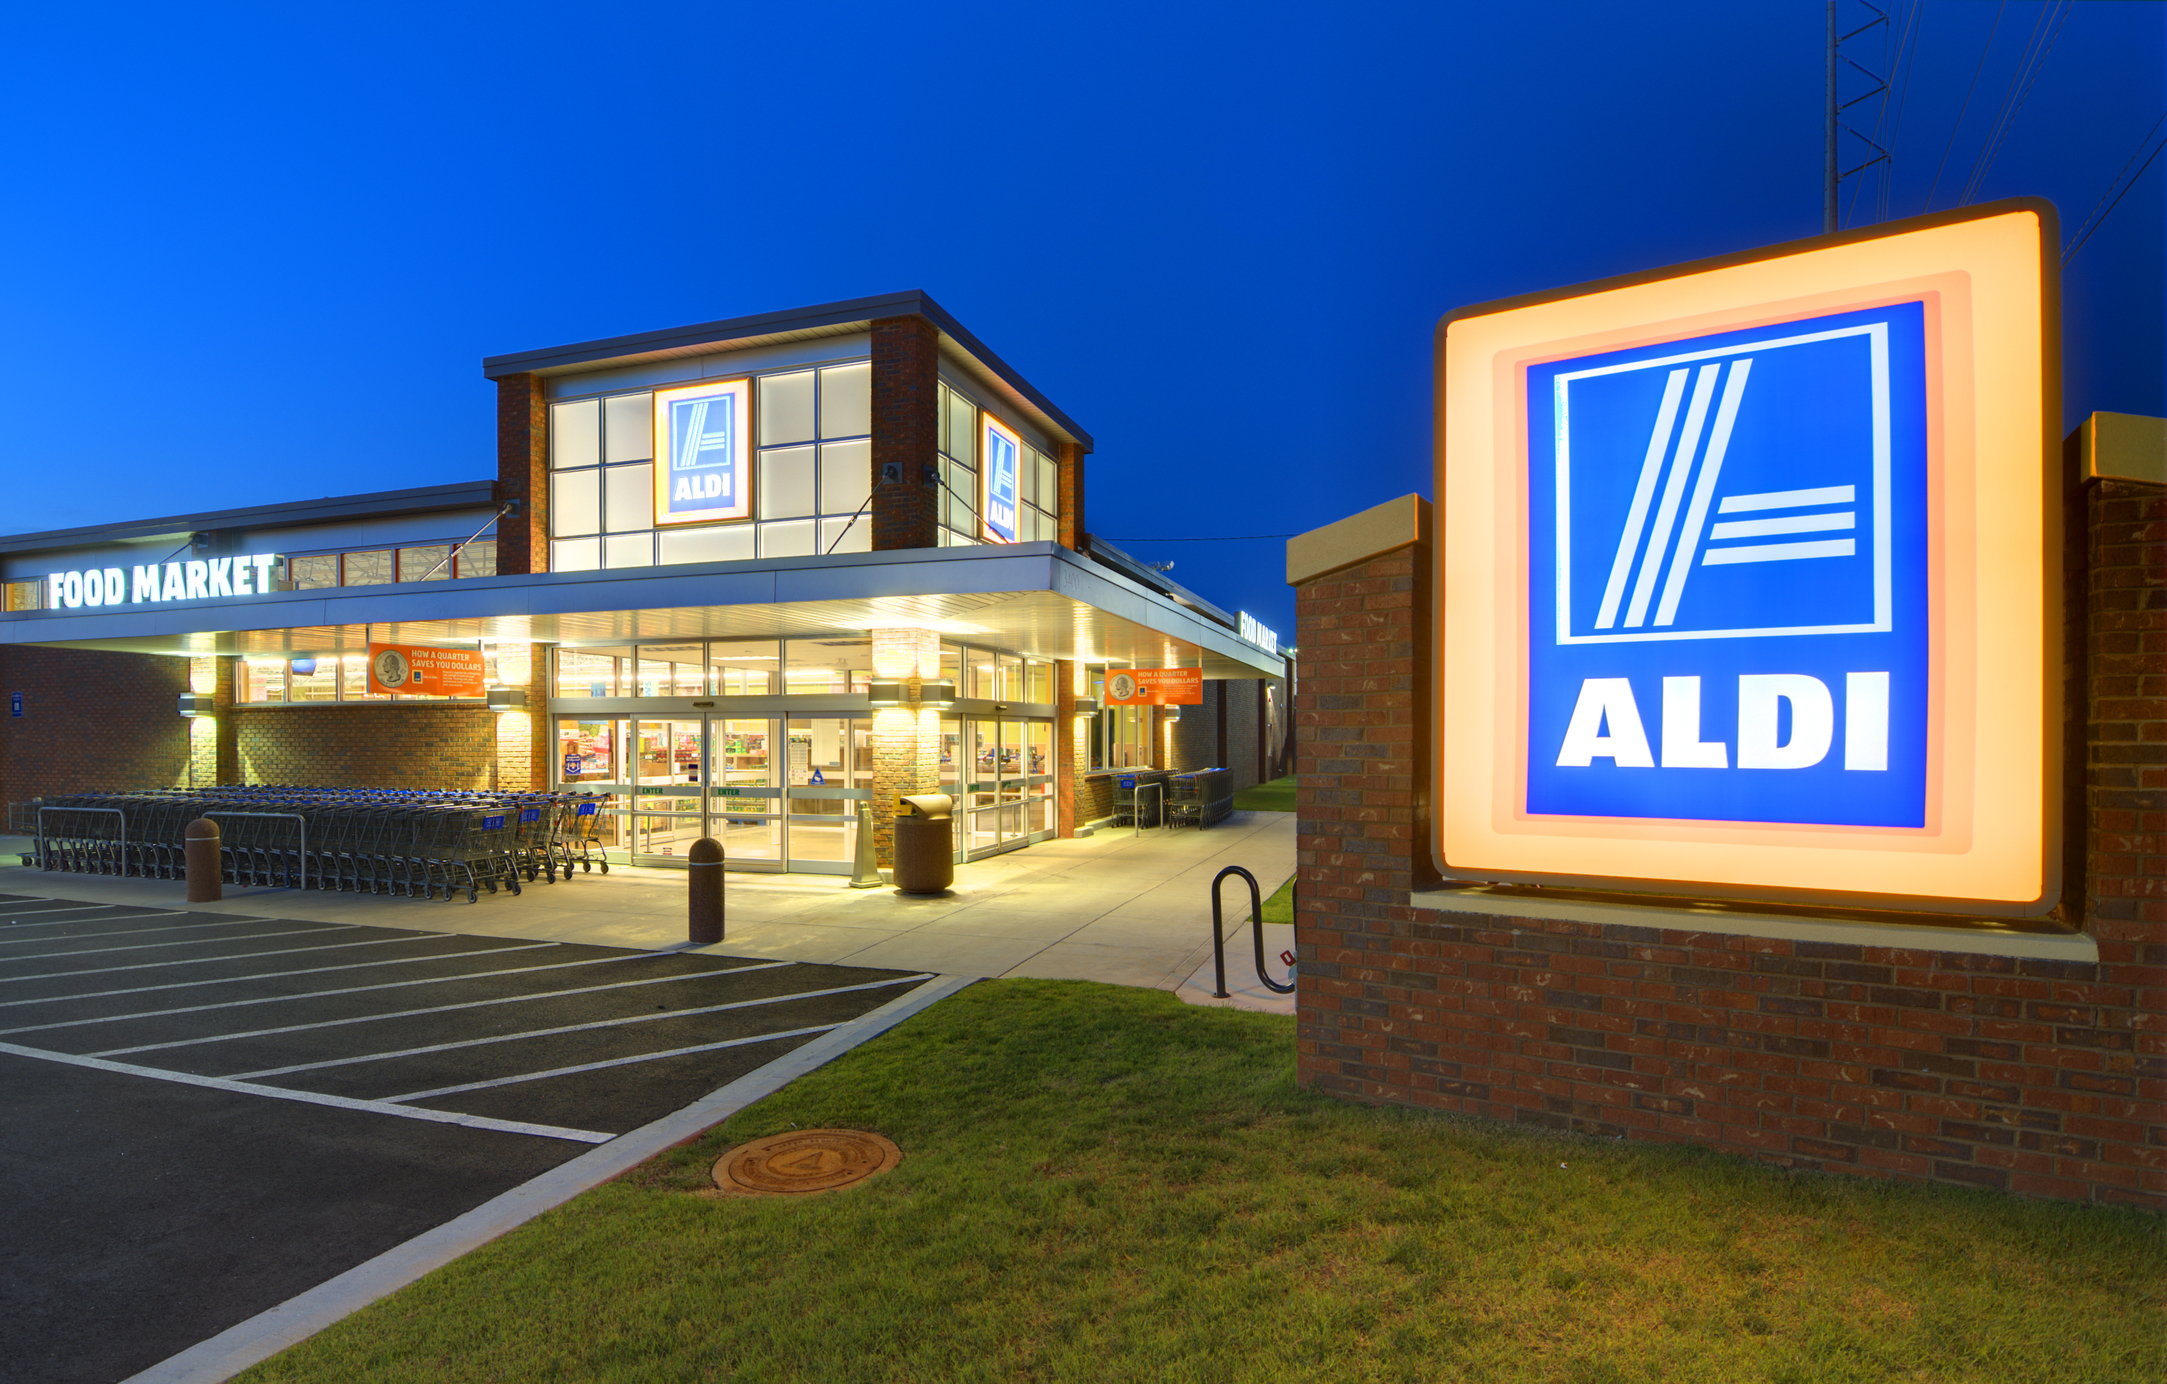 9 things to know before your first trip to Aldi